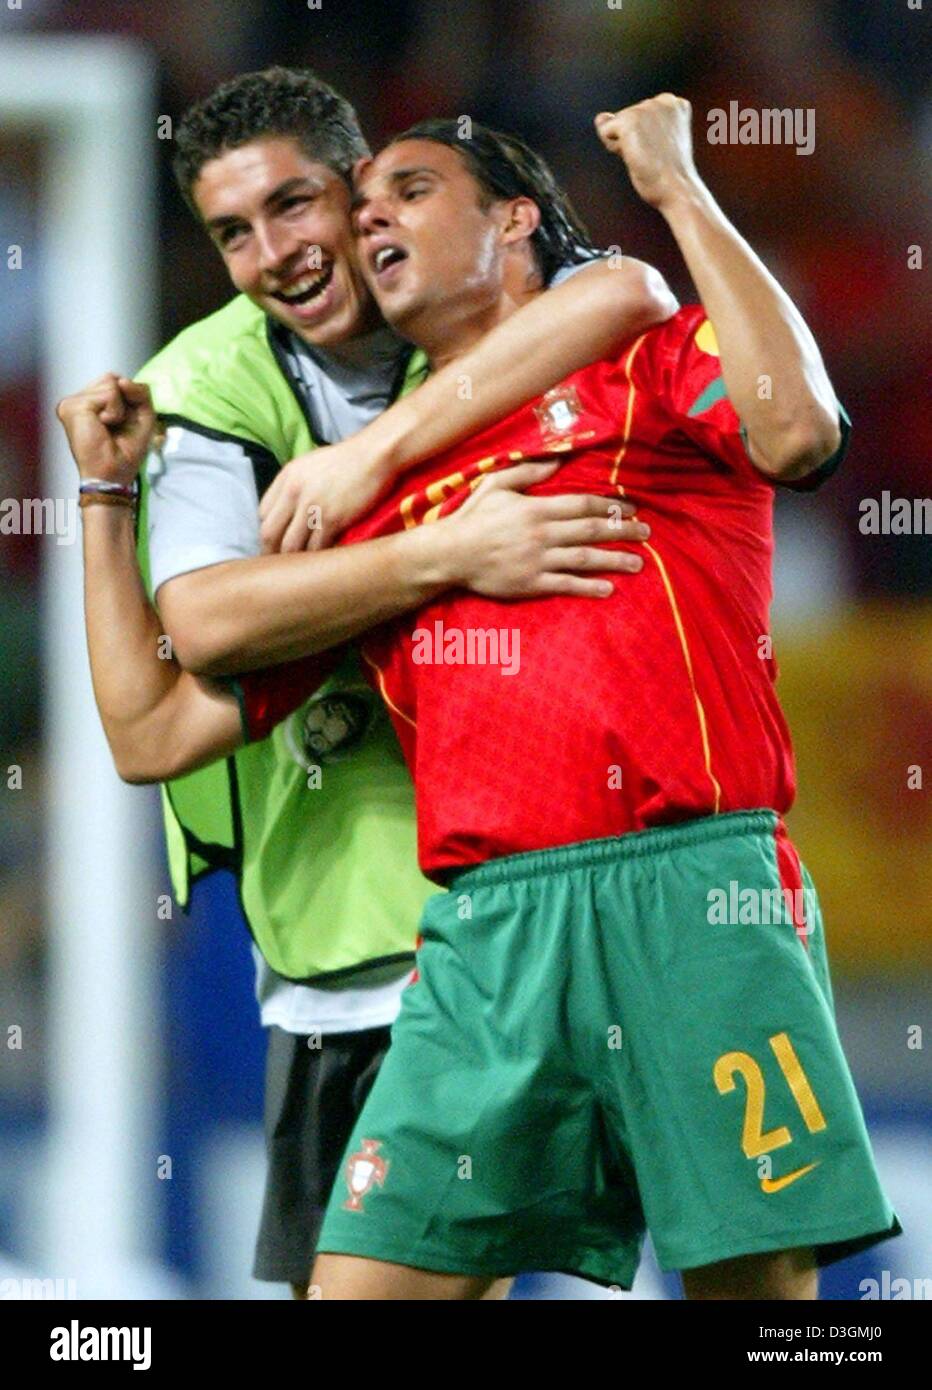 (dpa) - Portuguese forward Nuno Gomes (R) cheers and is hugged by goalkeeper Jose Filipe Moreira (L), who sat on the substitute bench, after the final whistle of the Euro 2004 semi final game opposing Portugal and the Netherlands in Lisbon, Portugal, 30 June 2004. Portugal eliminated the Netherlands with a 2-1 win, achieving its first ever qualification for the European final.  +++ Stock Photo